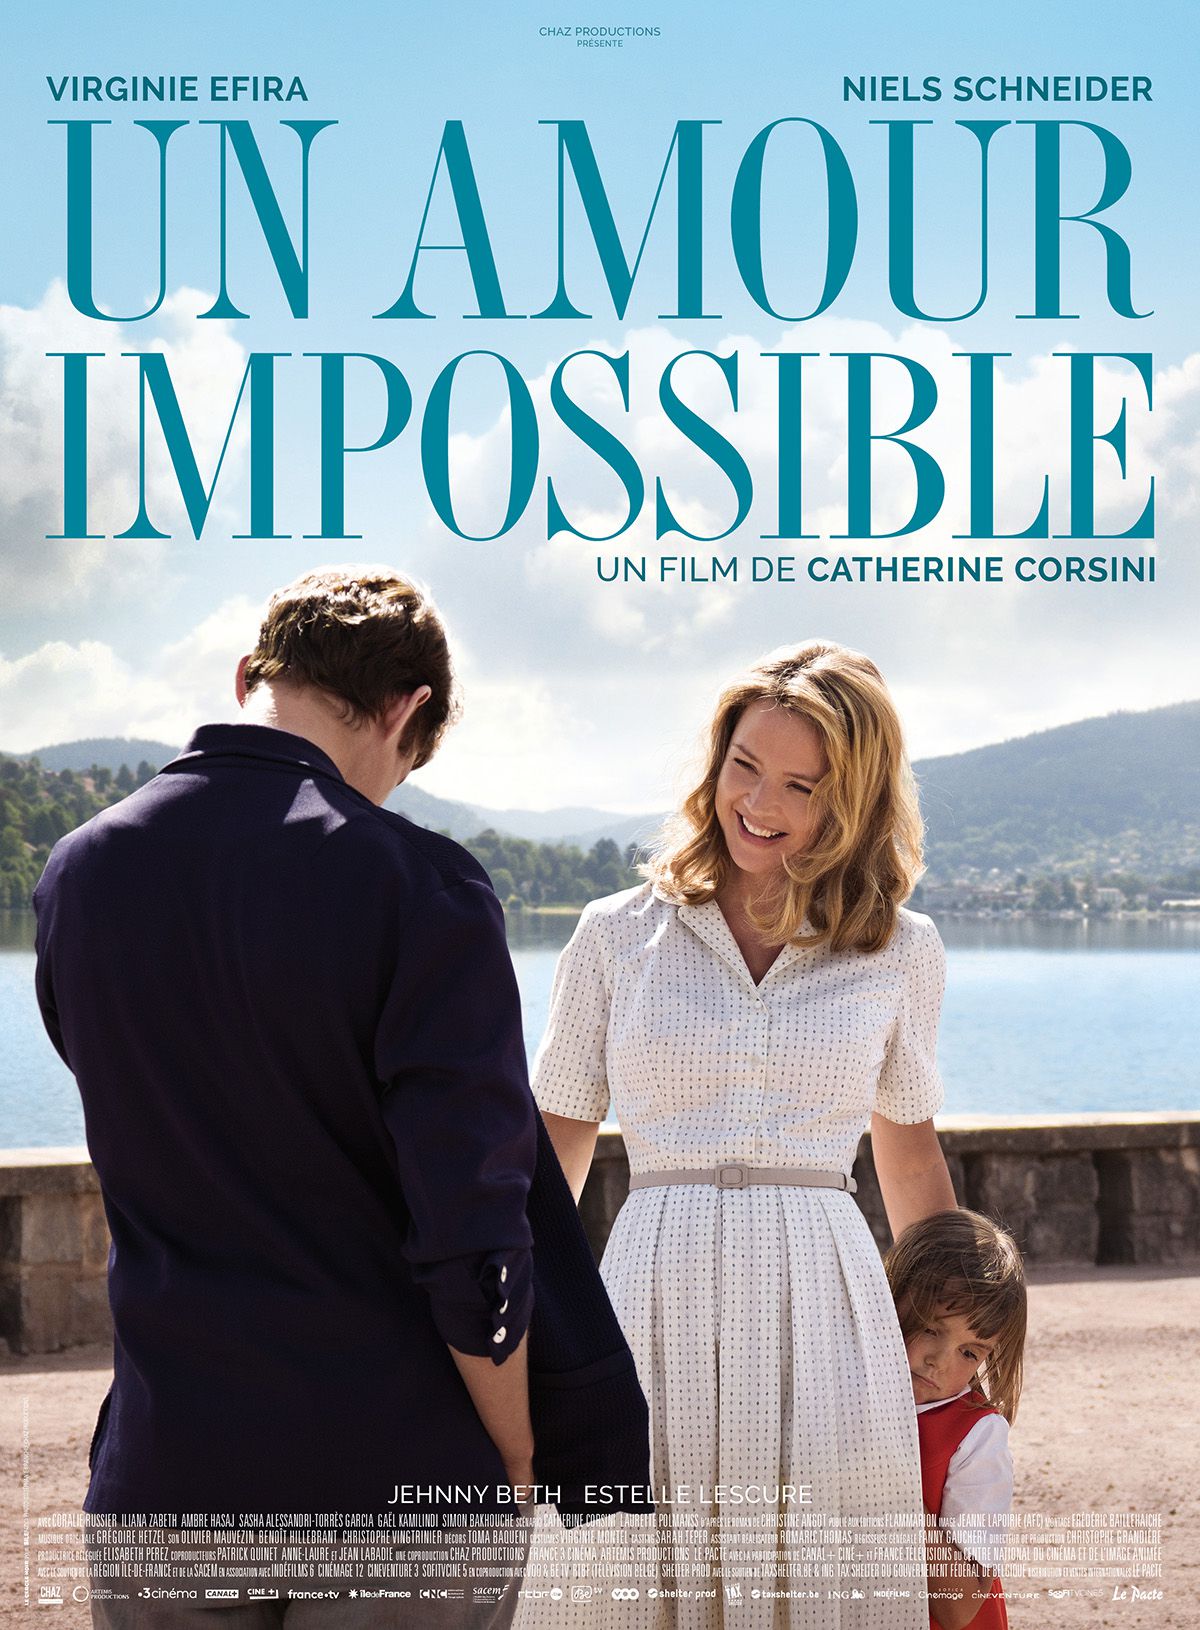 Un amour impossible - Film (2018) streaming VF gratuit complet